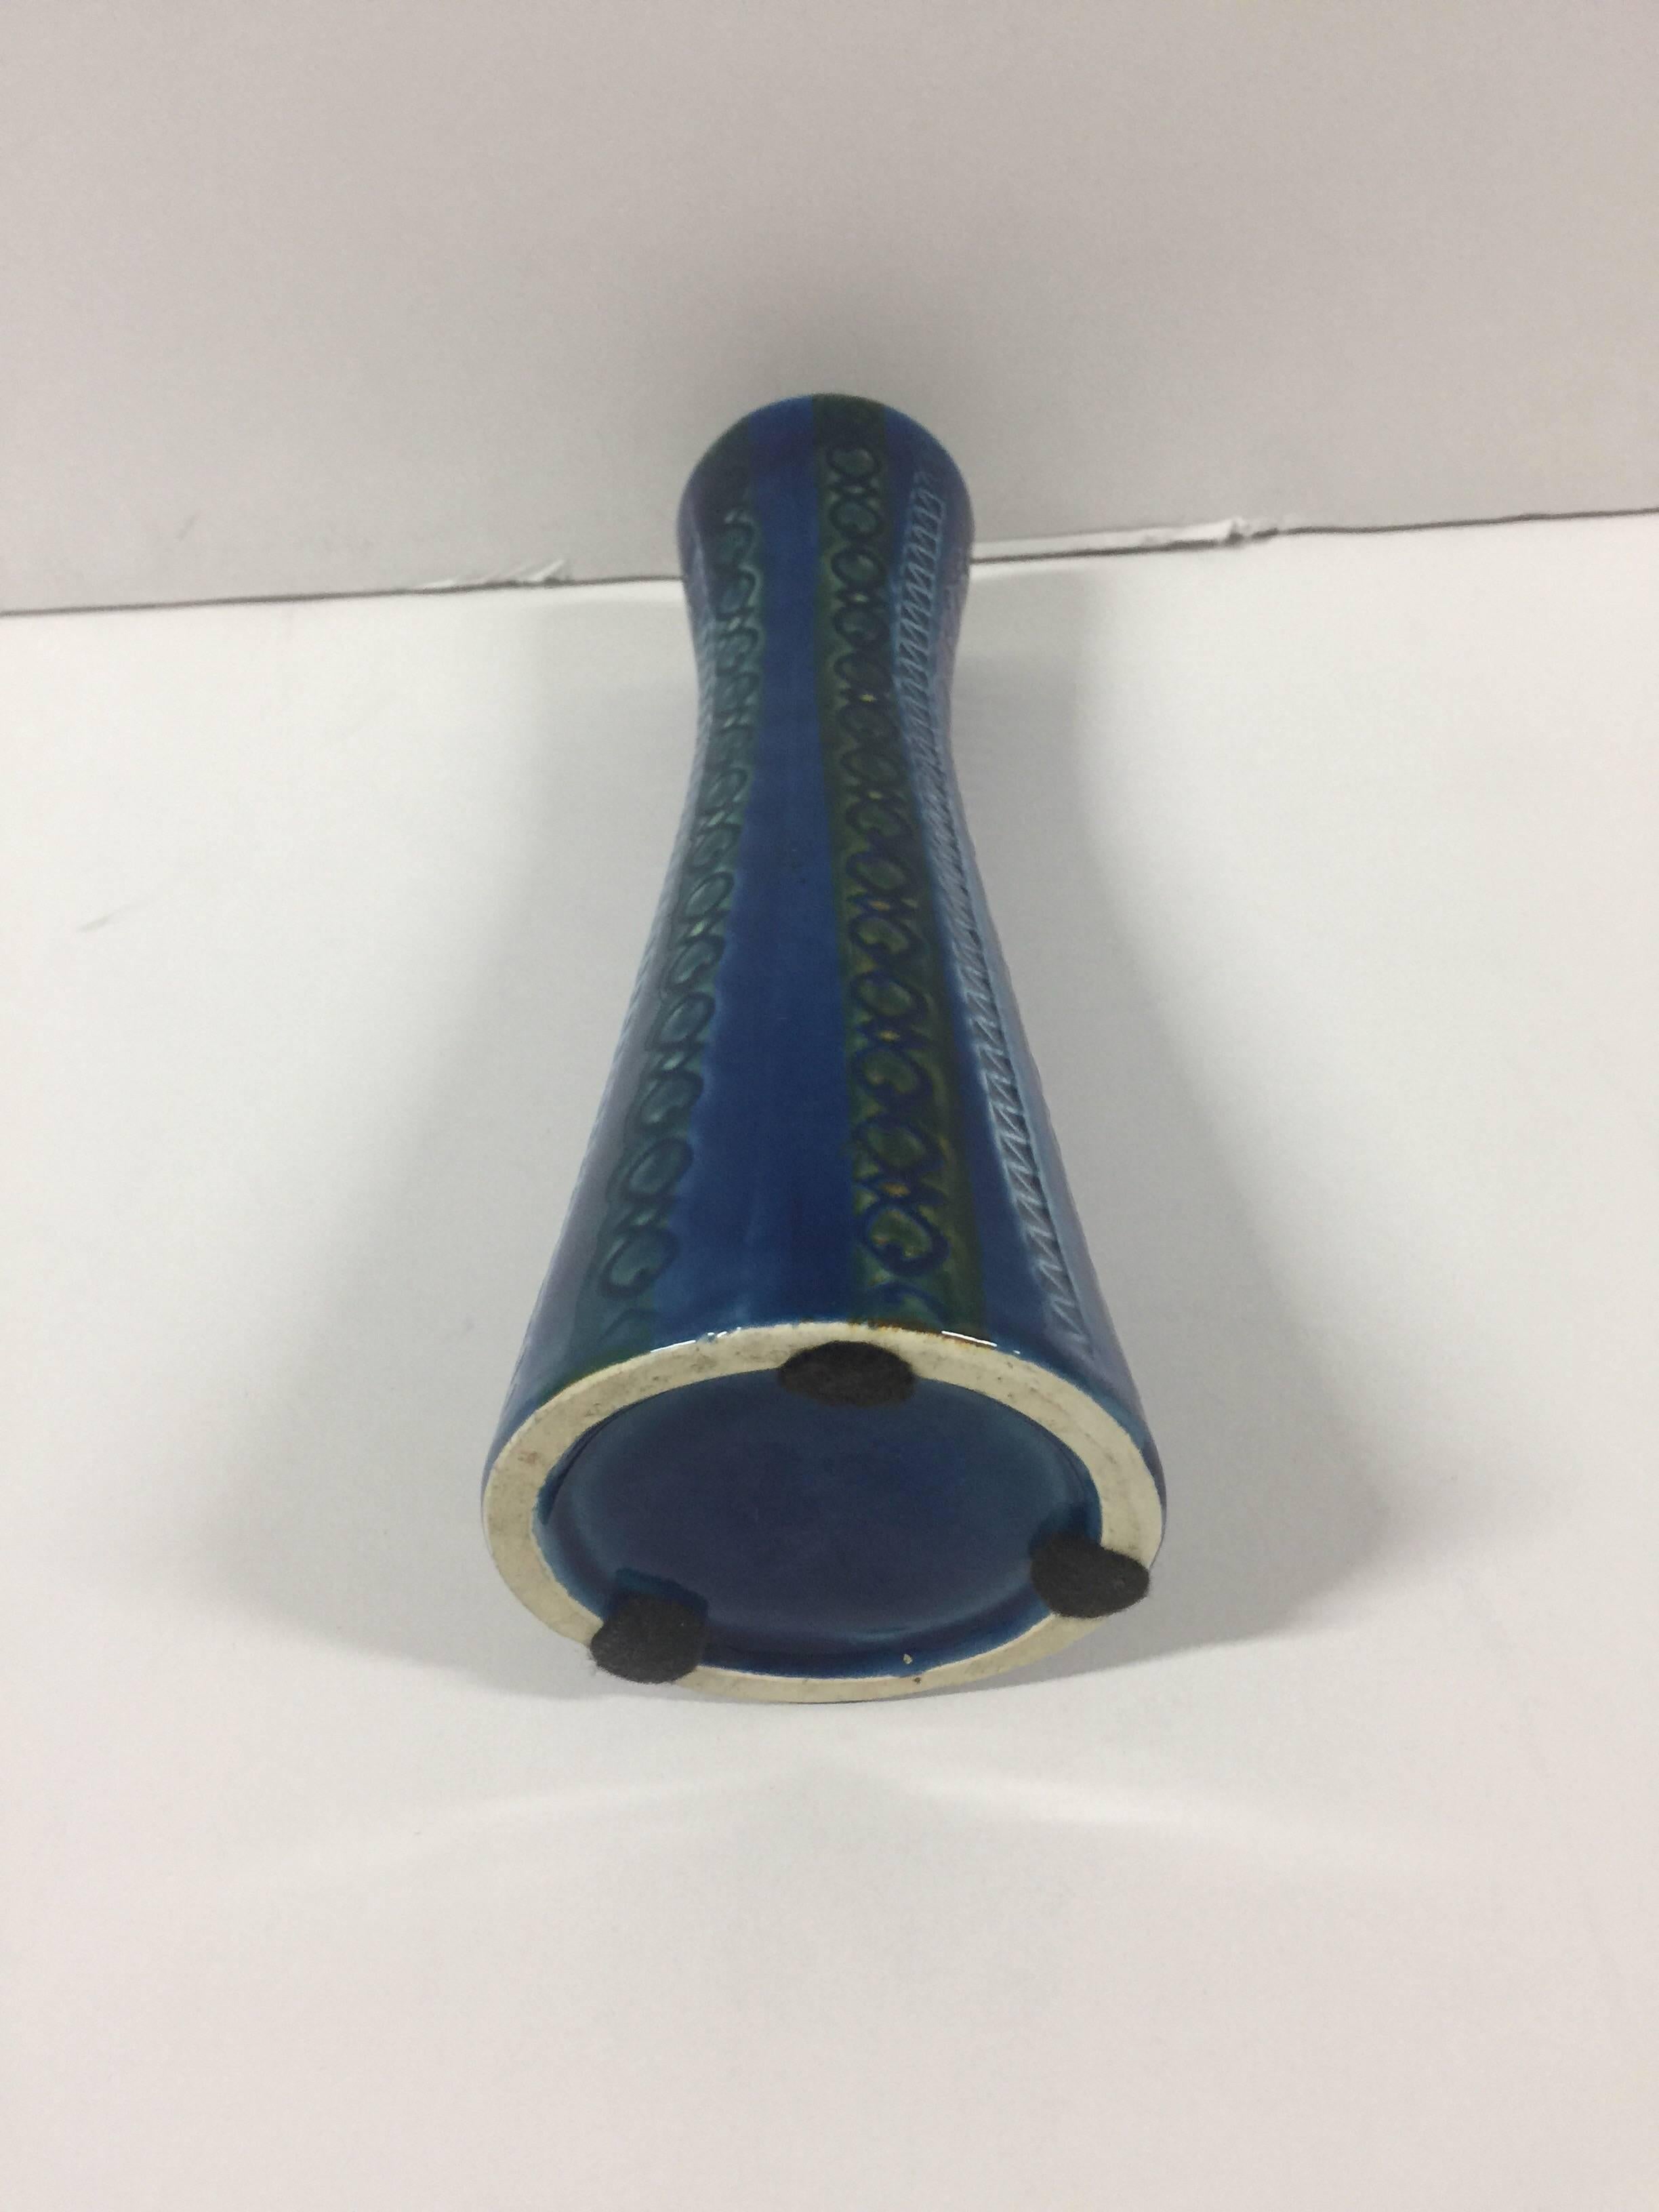 Italian Blue and Black Sgrafitto Bud Vase by Bitossi for Raymor